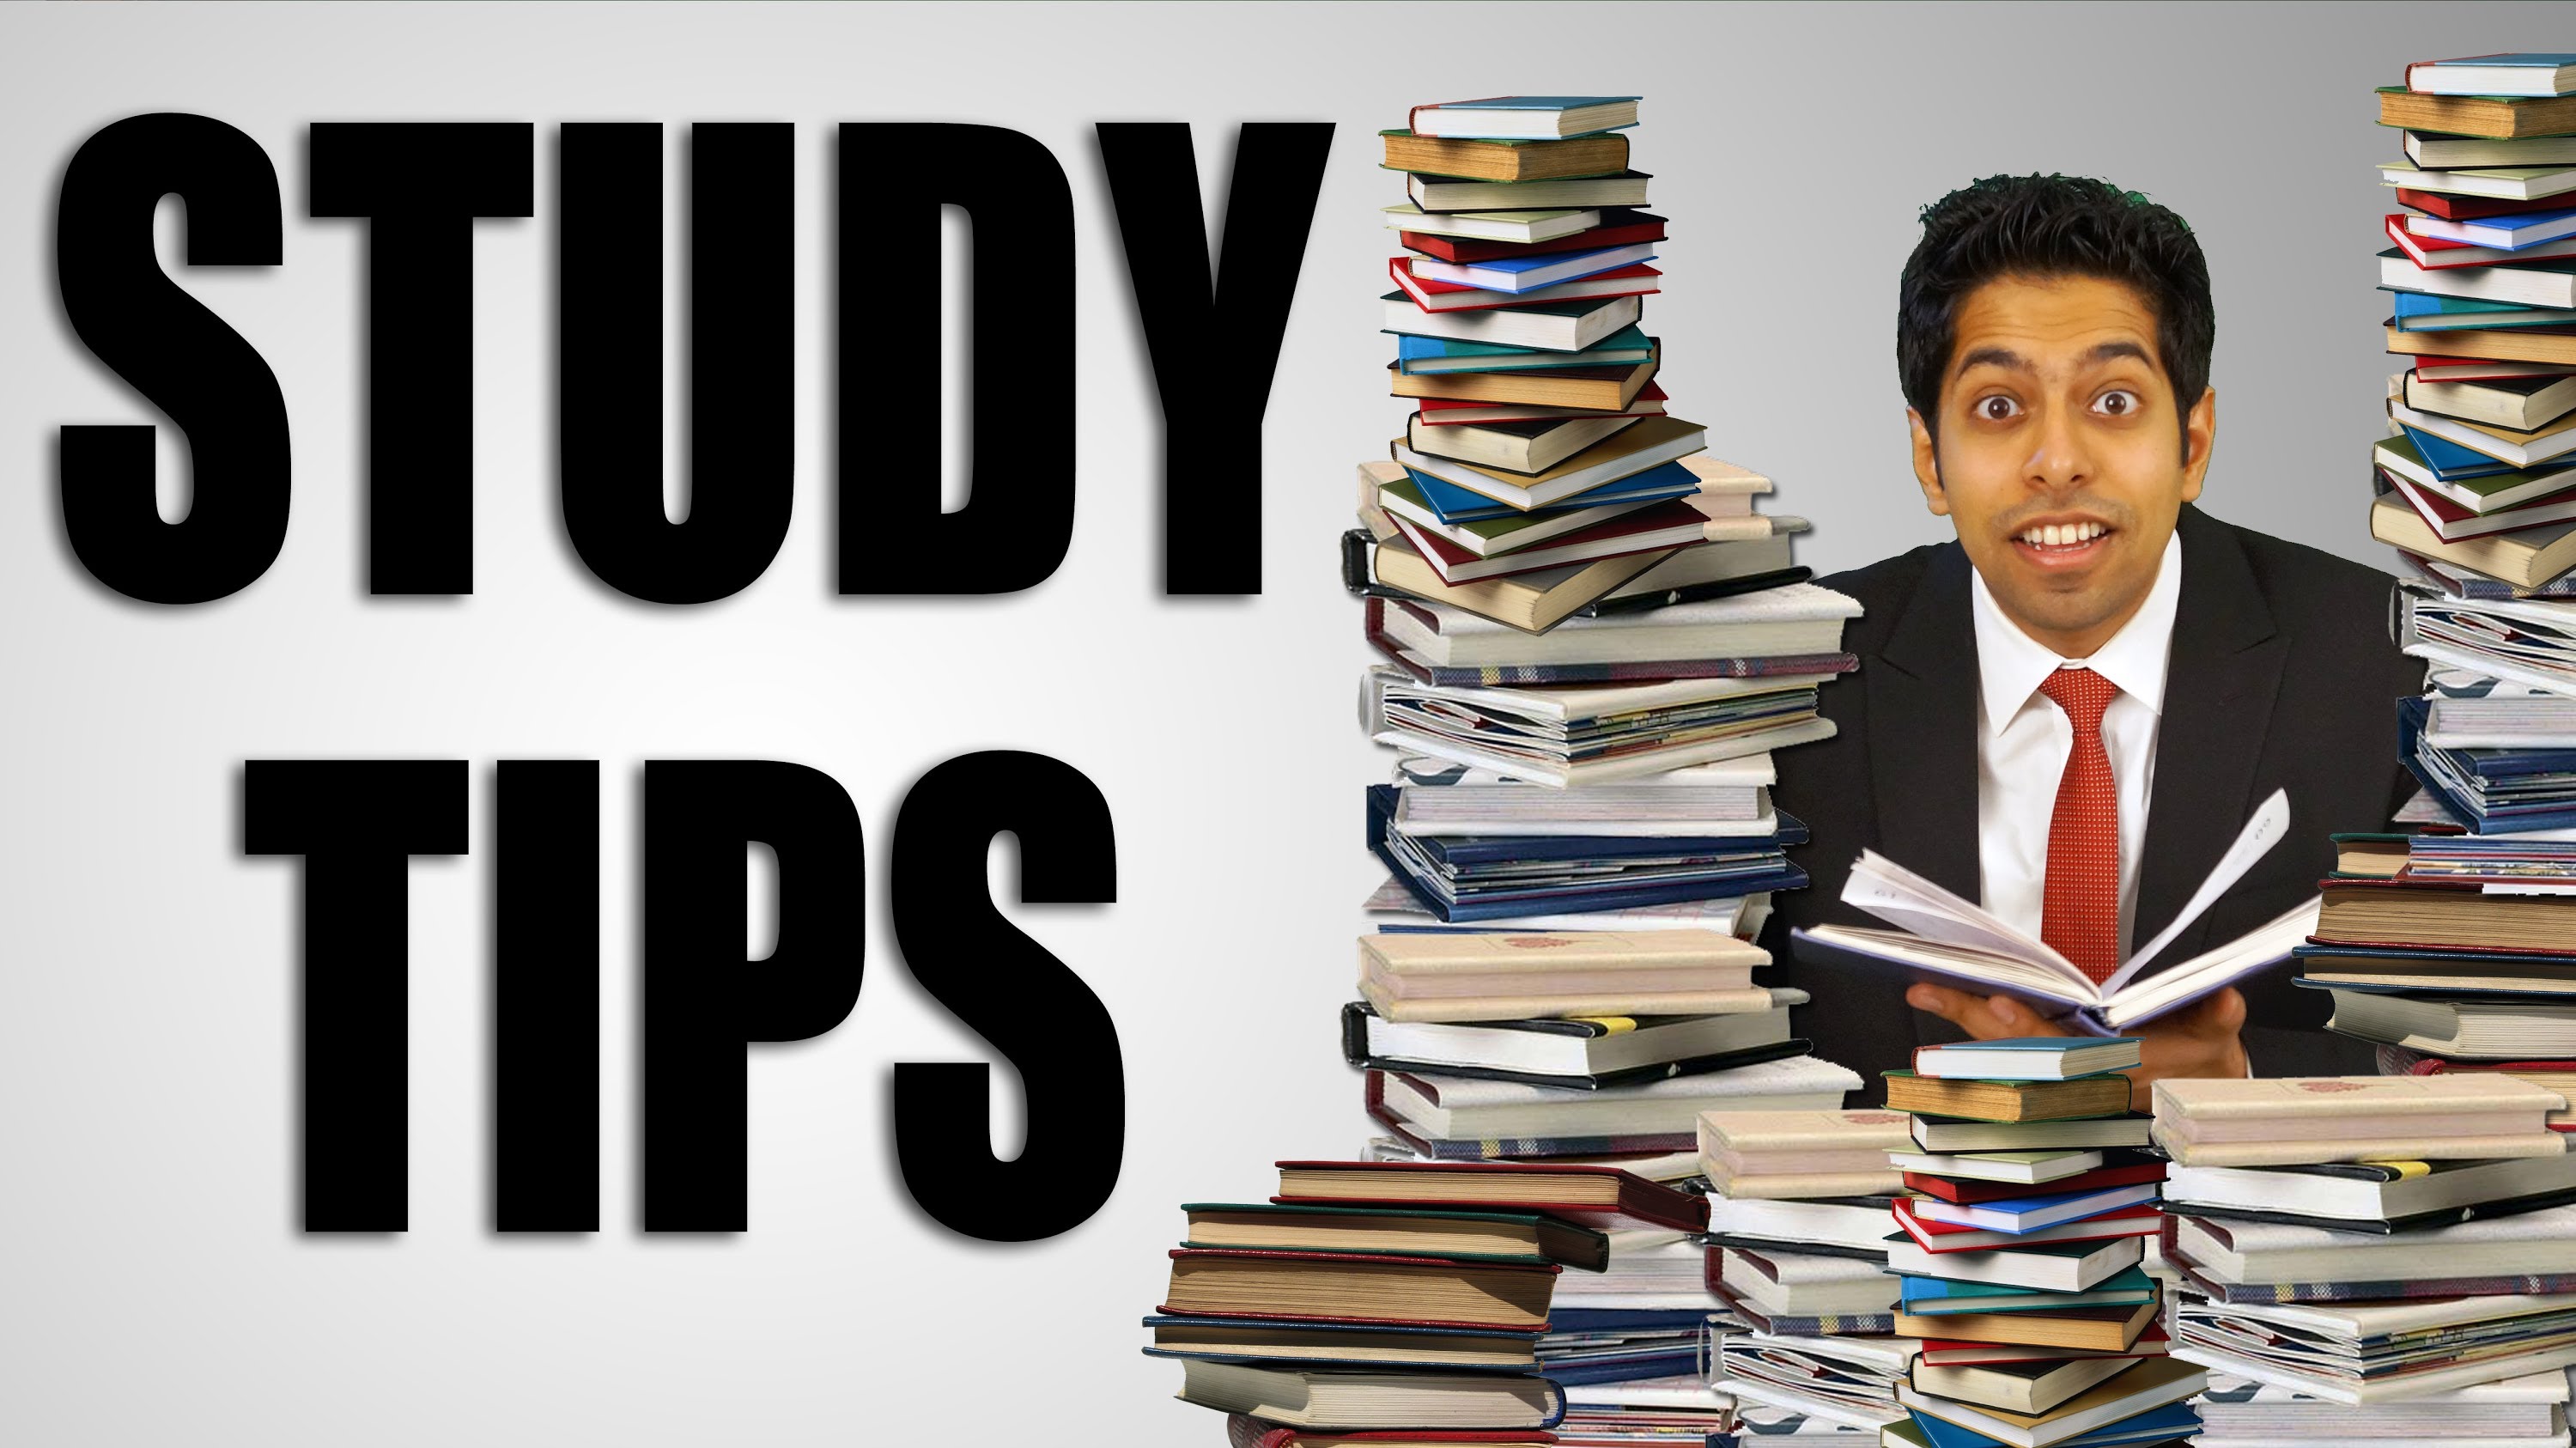  Study tips to improve concentration while studying.